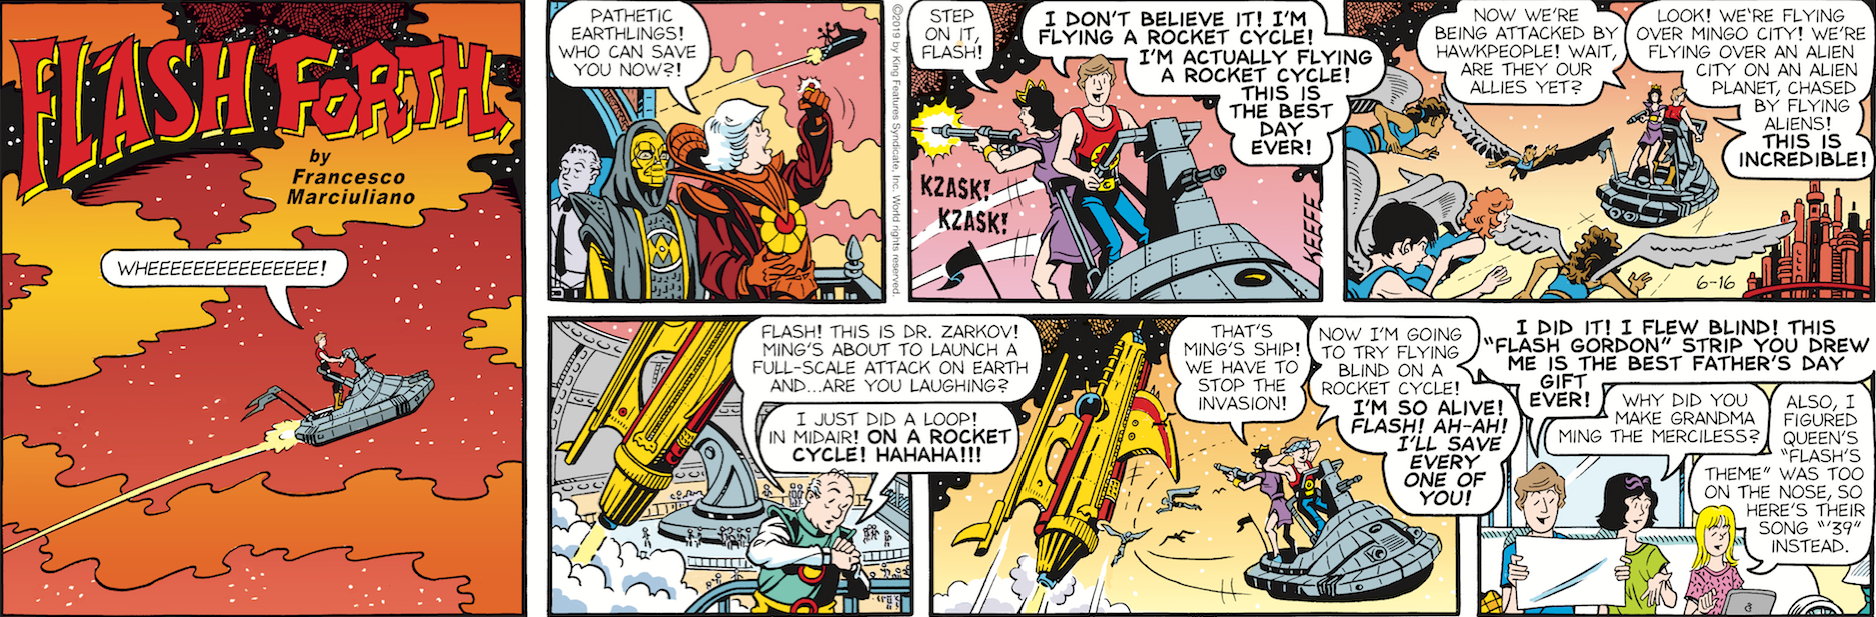 An image of a multl-panel Sally Forth comic strip in the style of the Flash Gordon strip is shown.